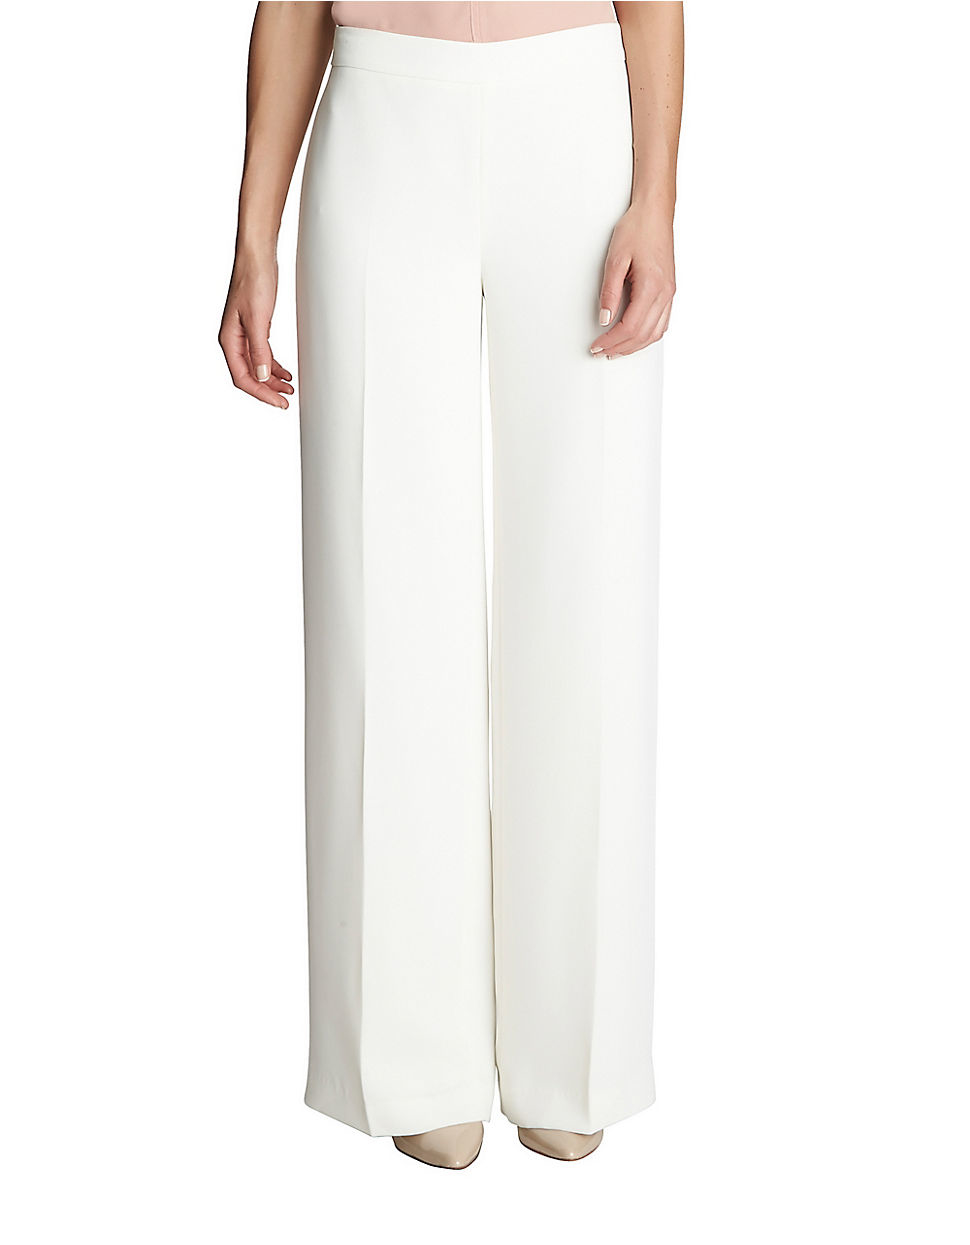 Lyst - Cece by cynthia steffe Wide-leg Dress Pants in Natural